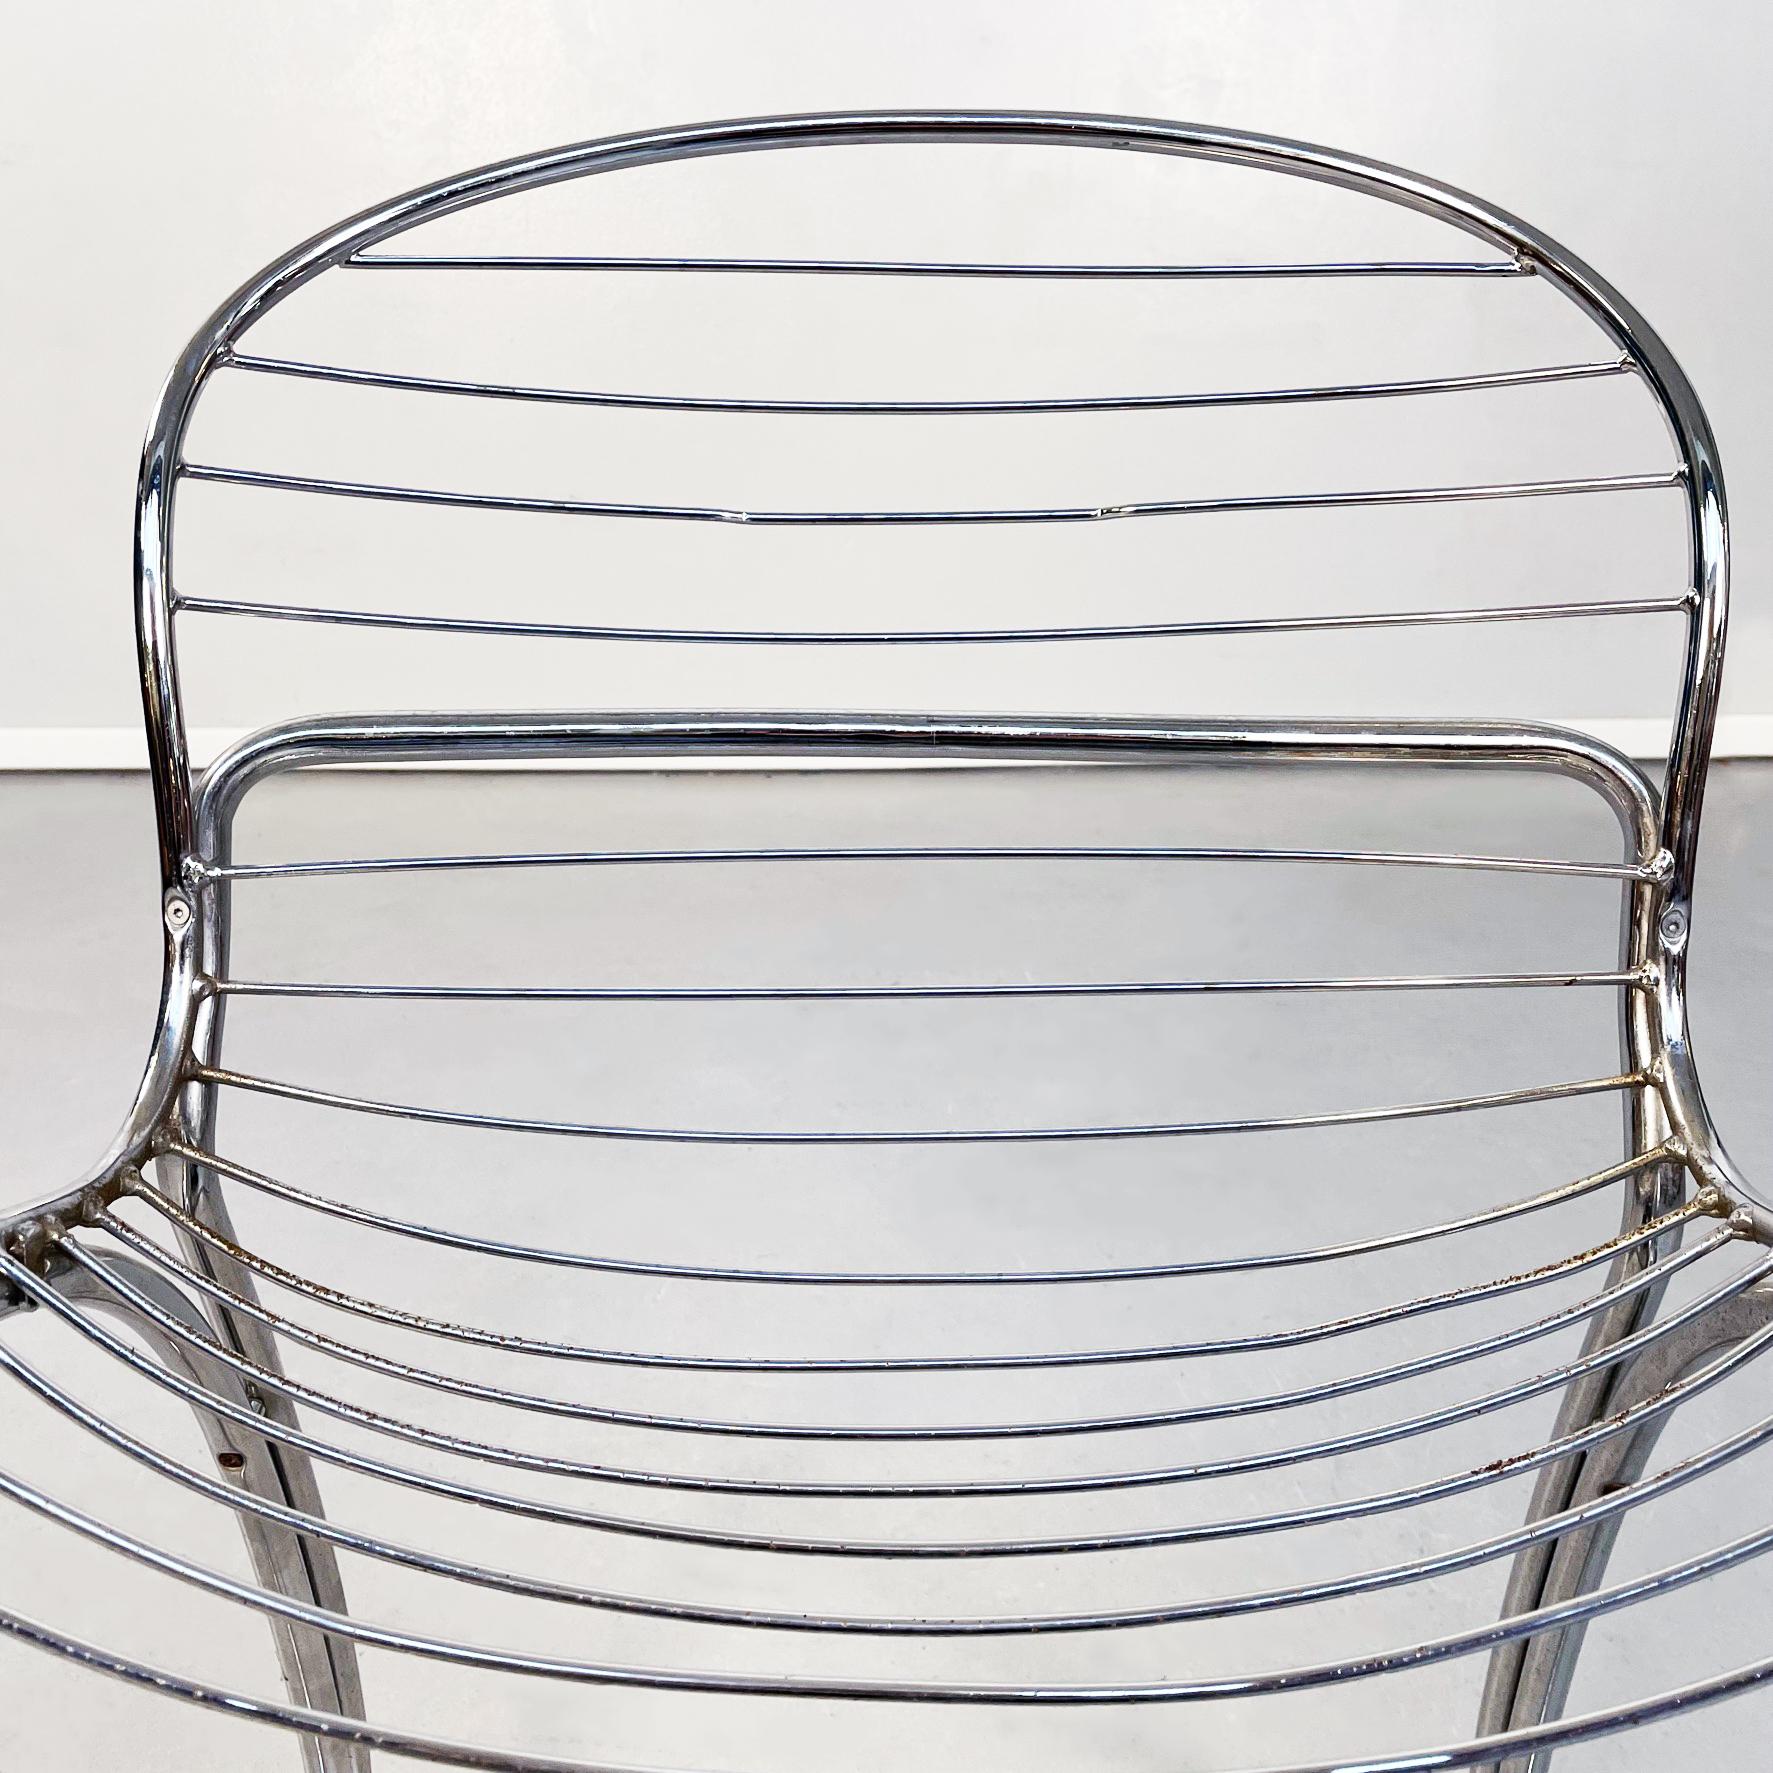 Italian mid-century steel Sabrina chairs by Gastone Rinaldi for Rima, 1970s
Set of 6 Sabrina chairs in curved chromed steel. The seat and back are made of fine tubular chromed steel that follows the shape of the body.
Produced by Rima in 1970s and